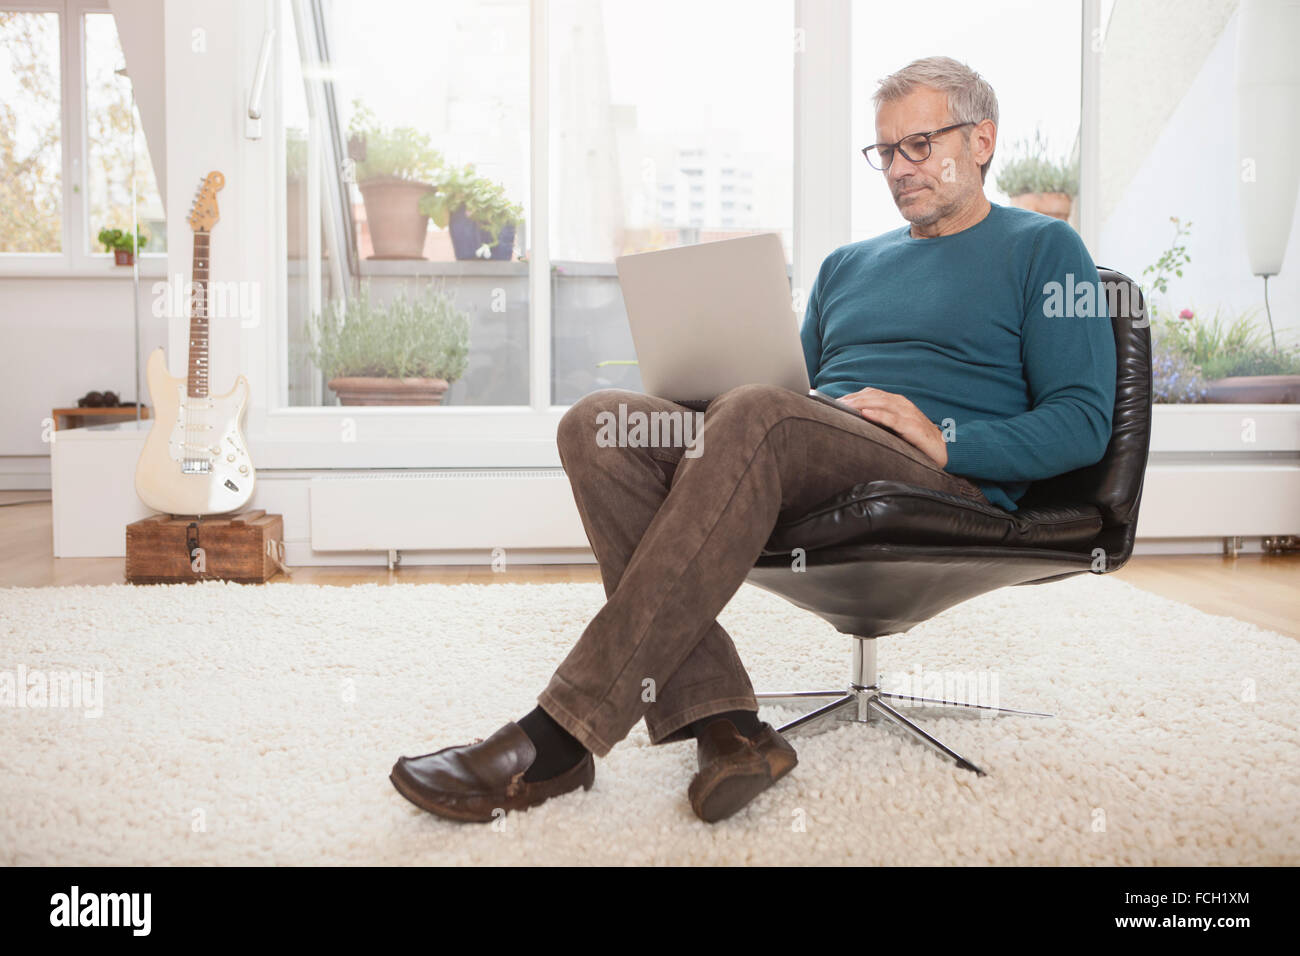 Mature man at home sitting in chair using laptop Stock Photo